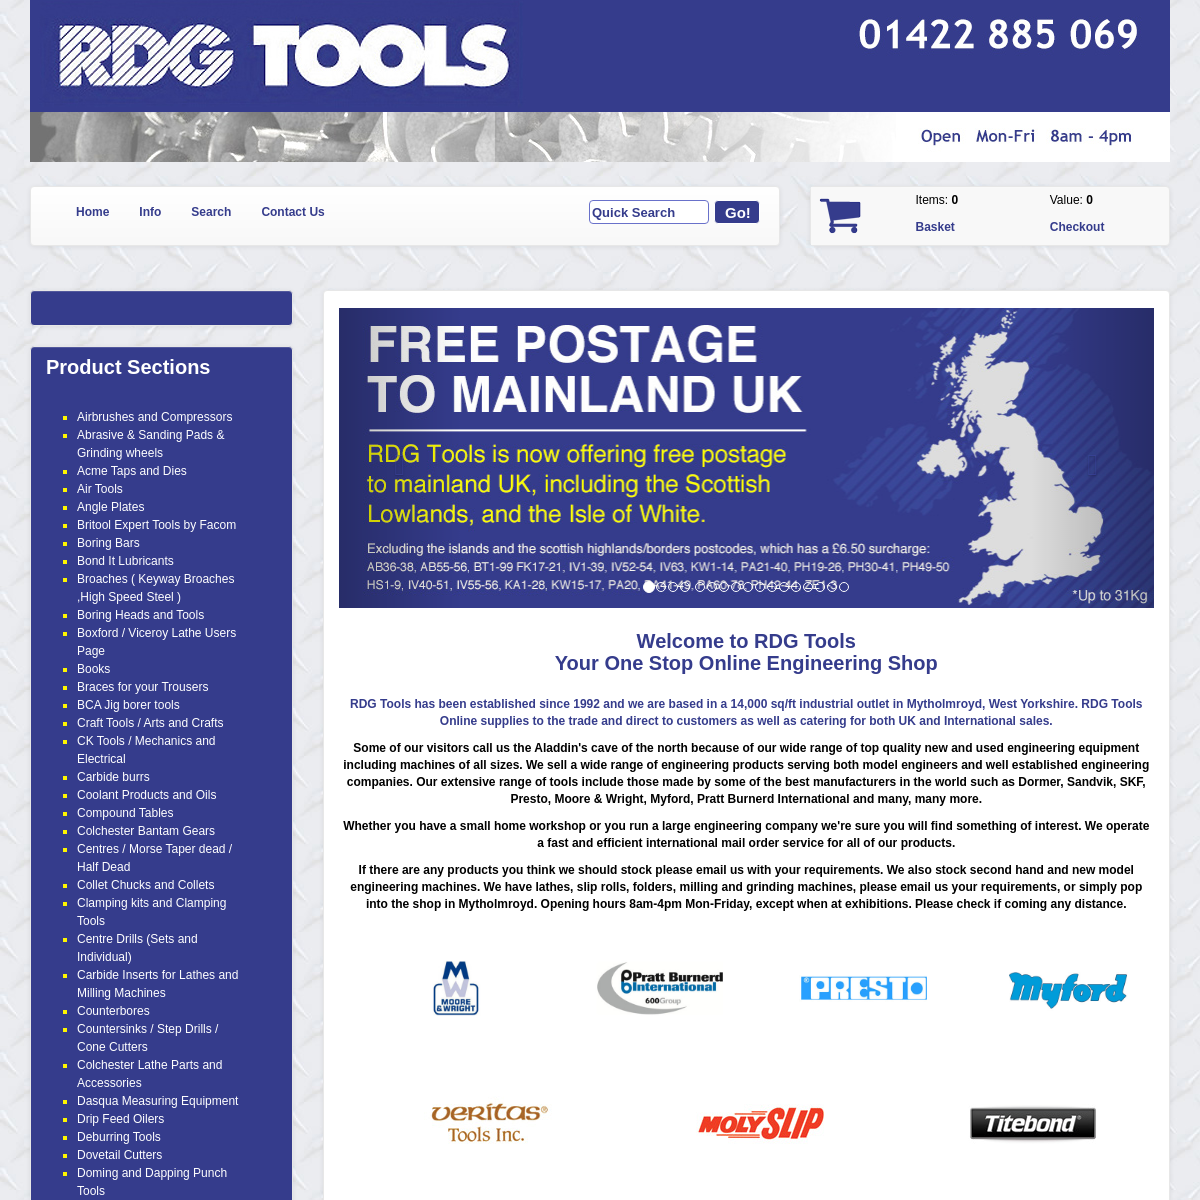 A complete backup of rdgtools.co.uk